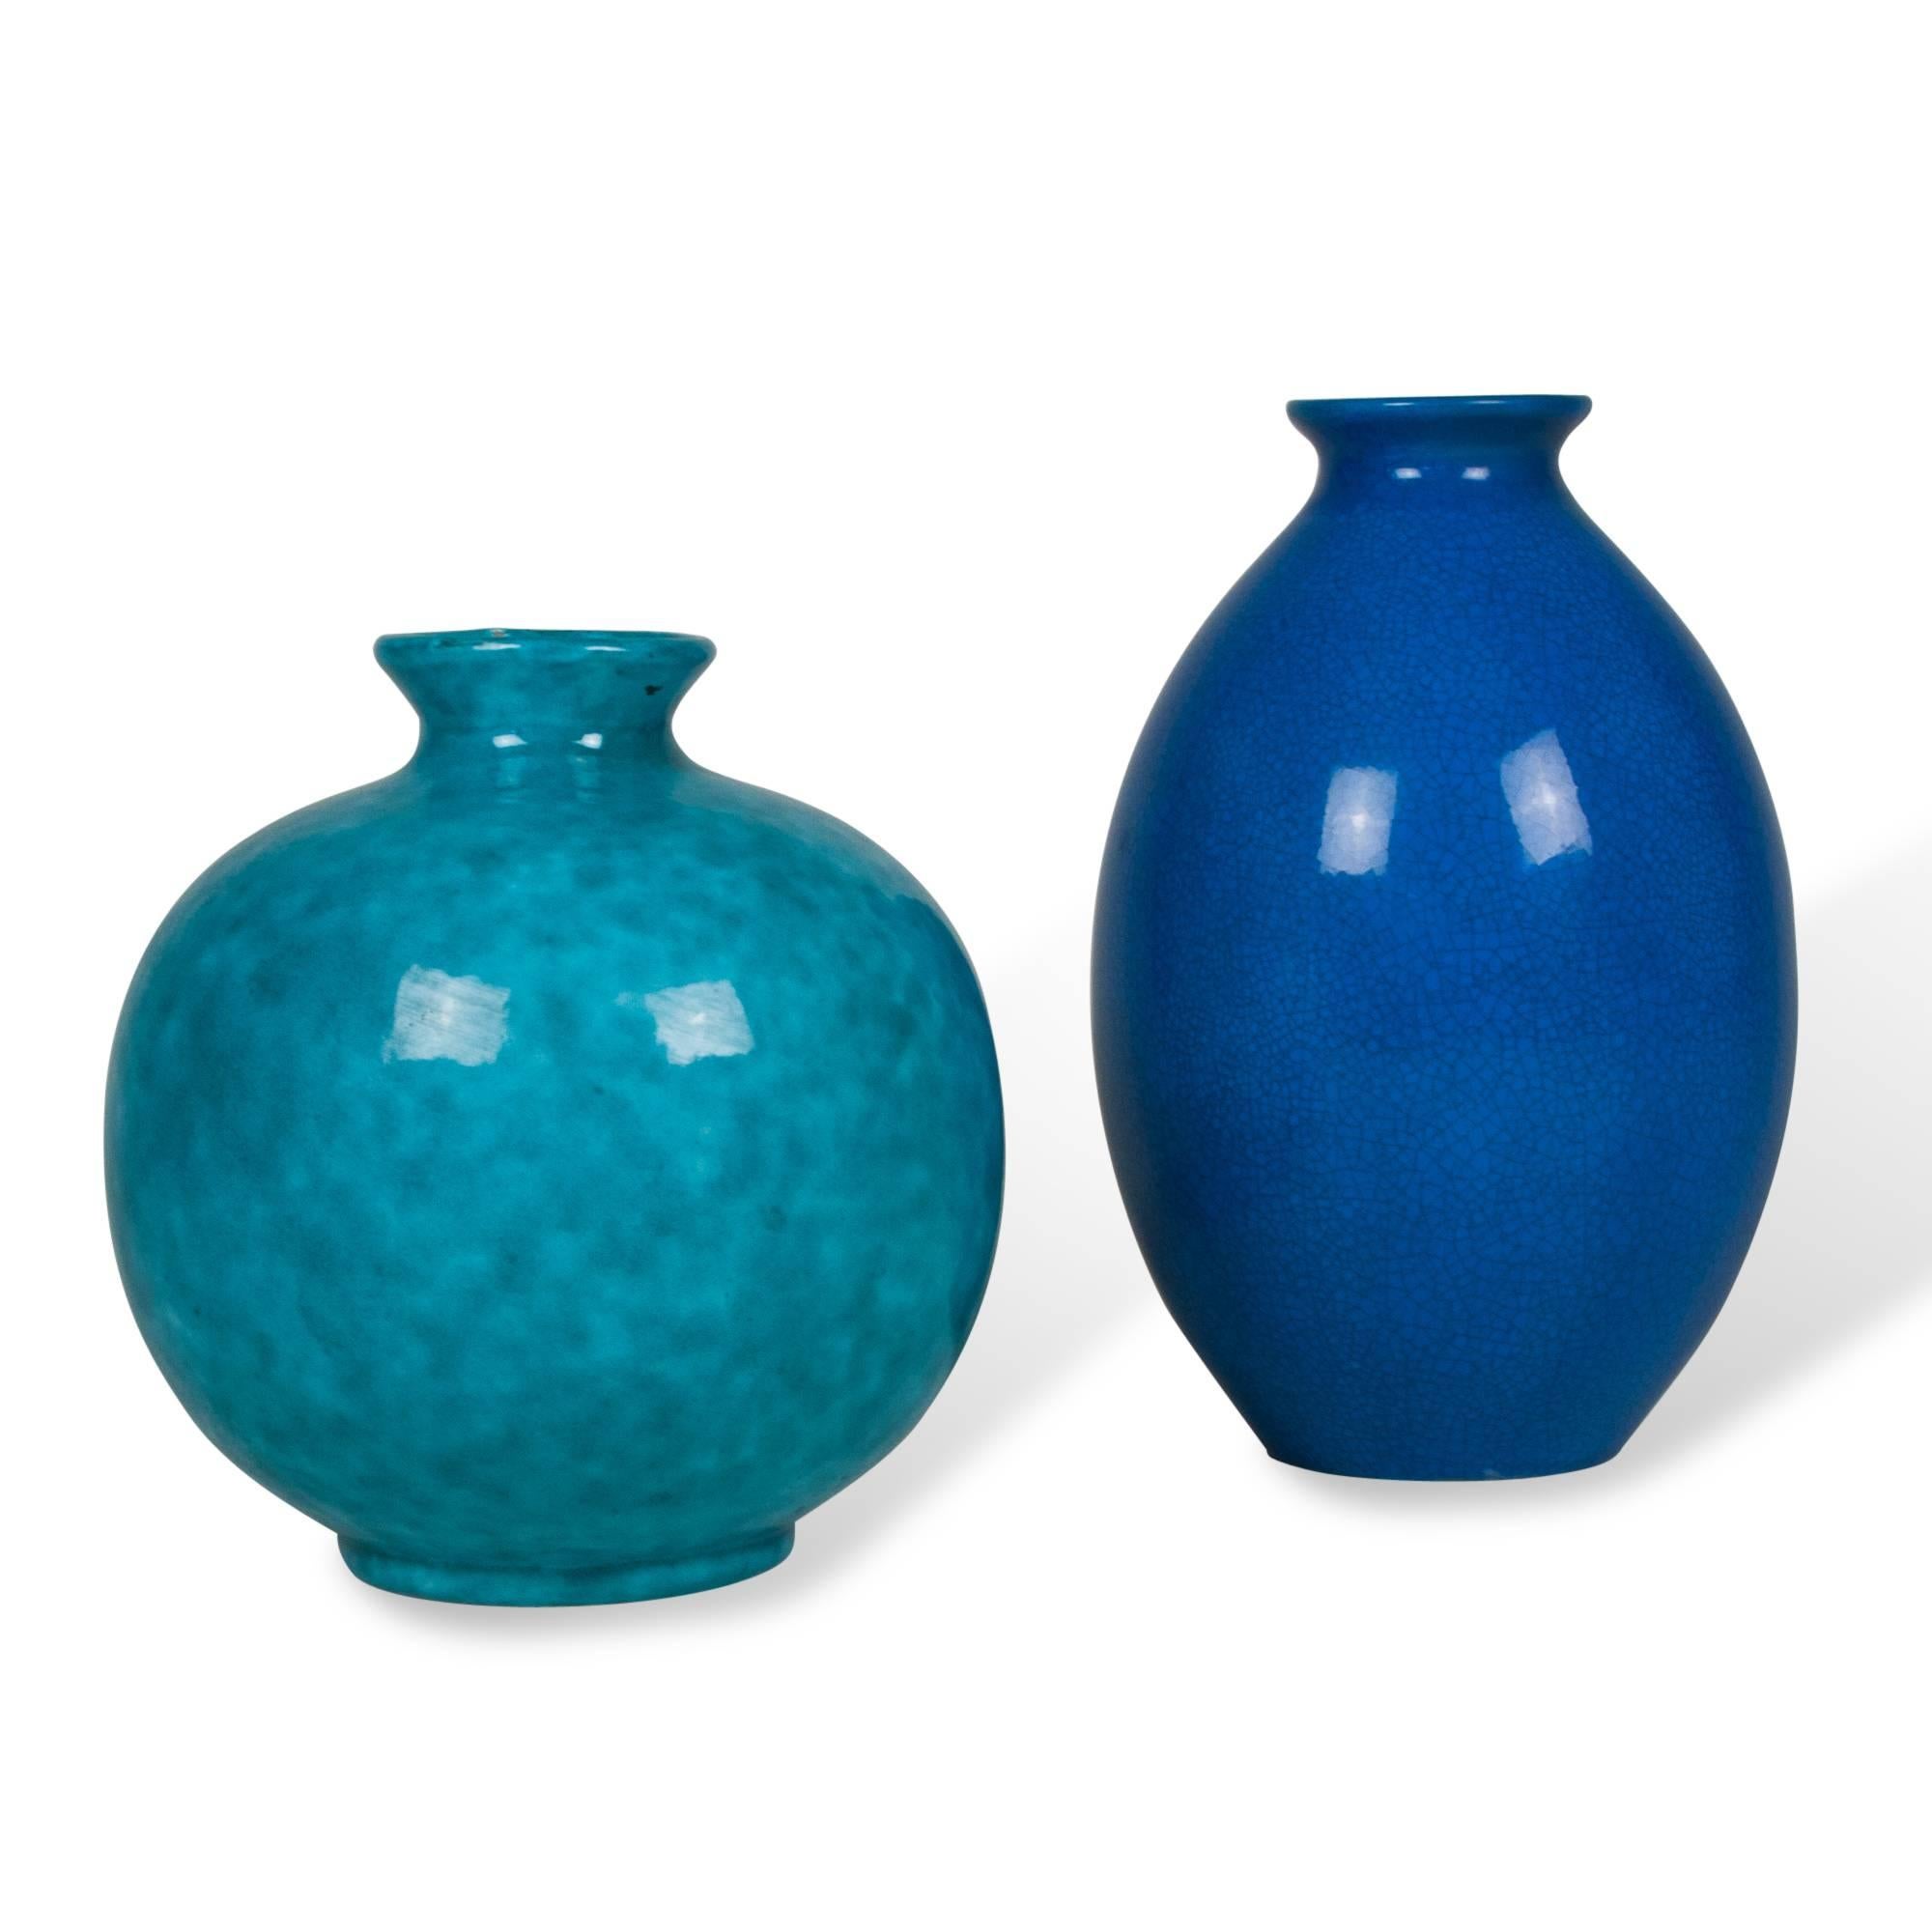 Set of two ceramic vases:
On left: Mottled blue glazed ceramic vase, spherical shape with pinched neck, by Jerome Massier, Vallauris, France, 1930s. Signed to underside. Height 10 in, largest diameter 8.5 in.

On right: Tall blue crackle glaze